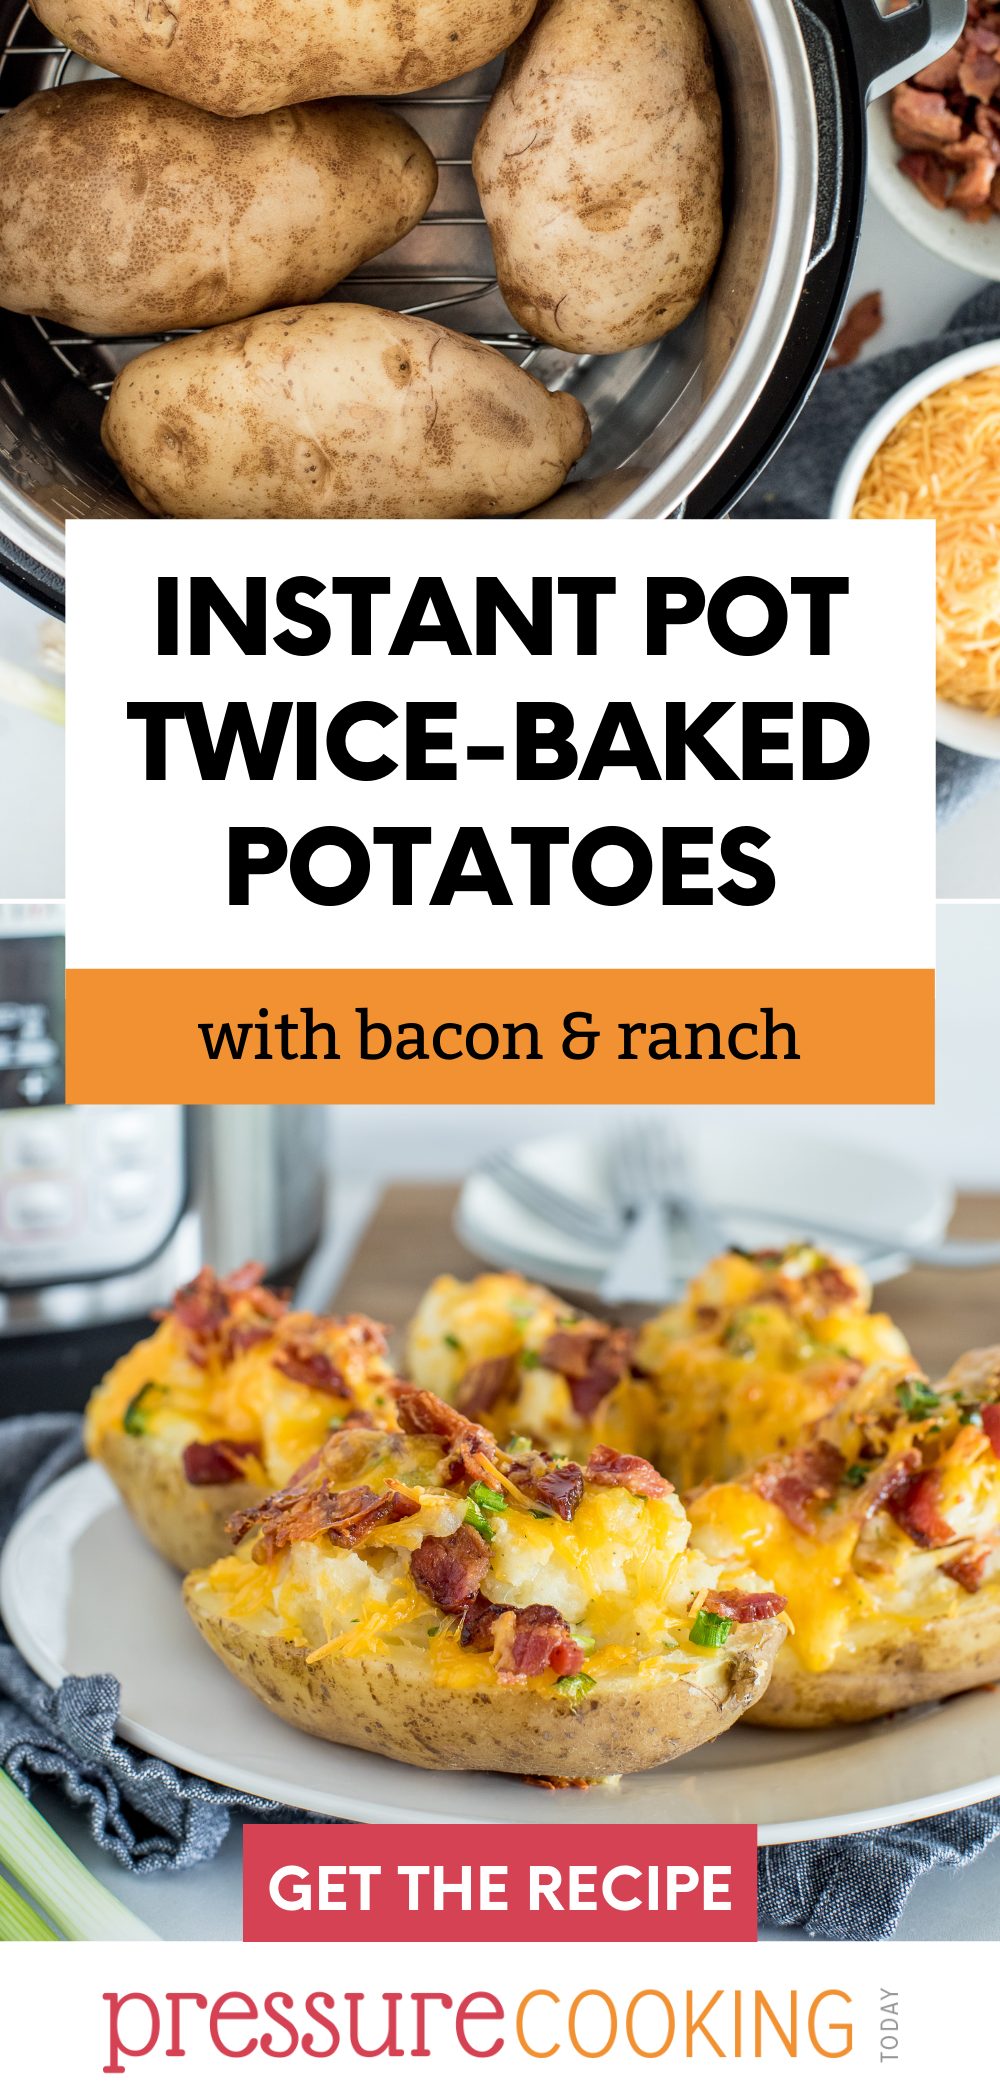 "Bake" your potatoes in your Instant Pot, then halve and smother them with ranch seasoning, cheese, and bacon, to make the BEST twice-baked potatoes ever. via @PressureCook2da